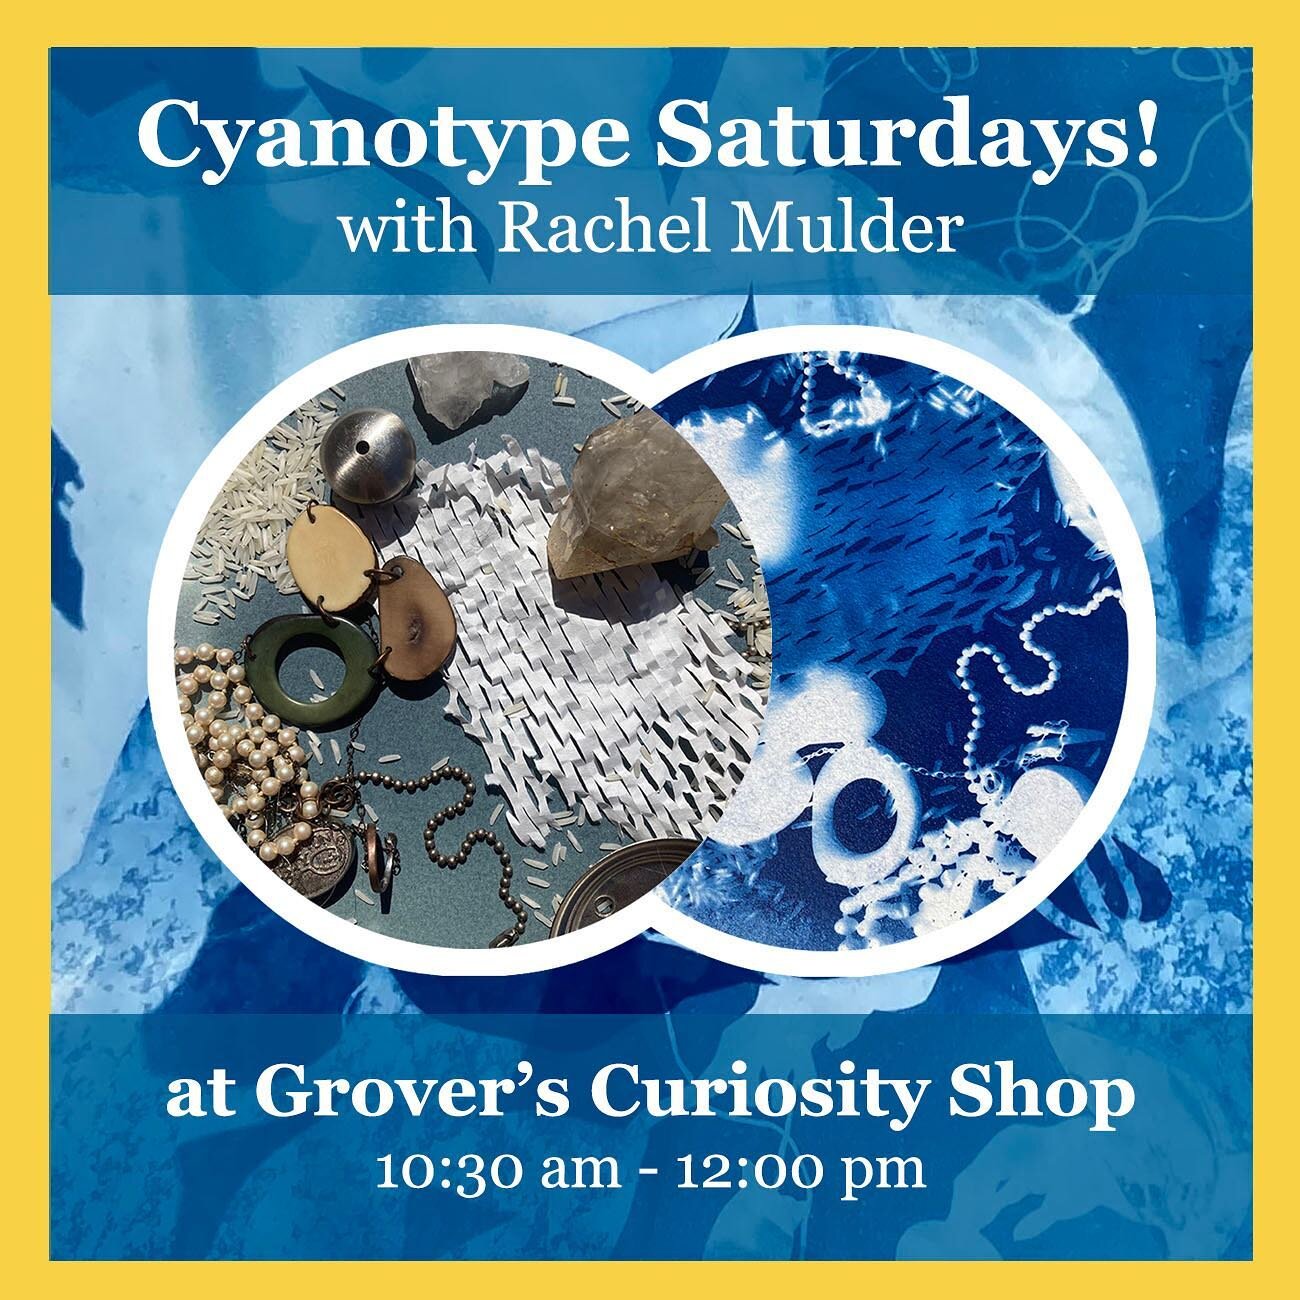 PORTLAND! inquiring minds have inspired me to share the alchemical magic of cyanotype here with YOU! join me for my first ever CYANOTYPE SATURDAY at @groverscuriosityshop on May 27 from 10:30 am - 12:00 pm! can&rsquo;t wait to have fun in the sun wit